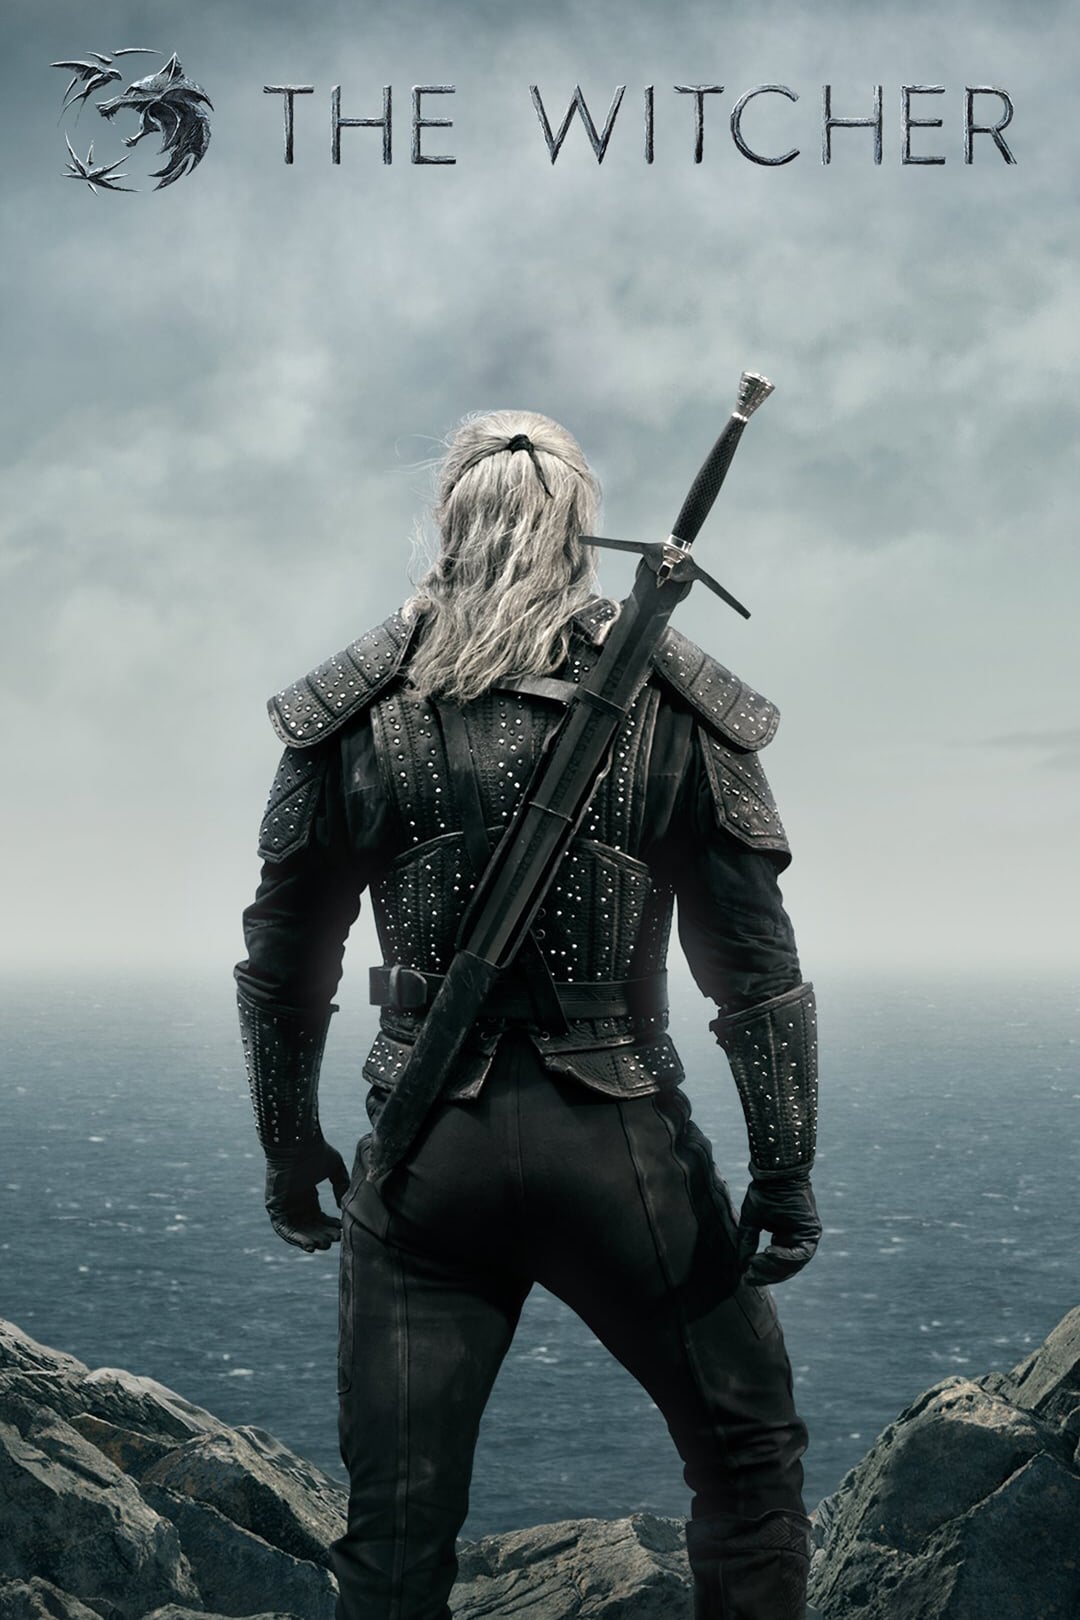 The Witcher – Season 1 – Official Teaser